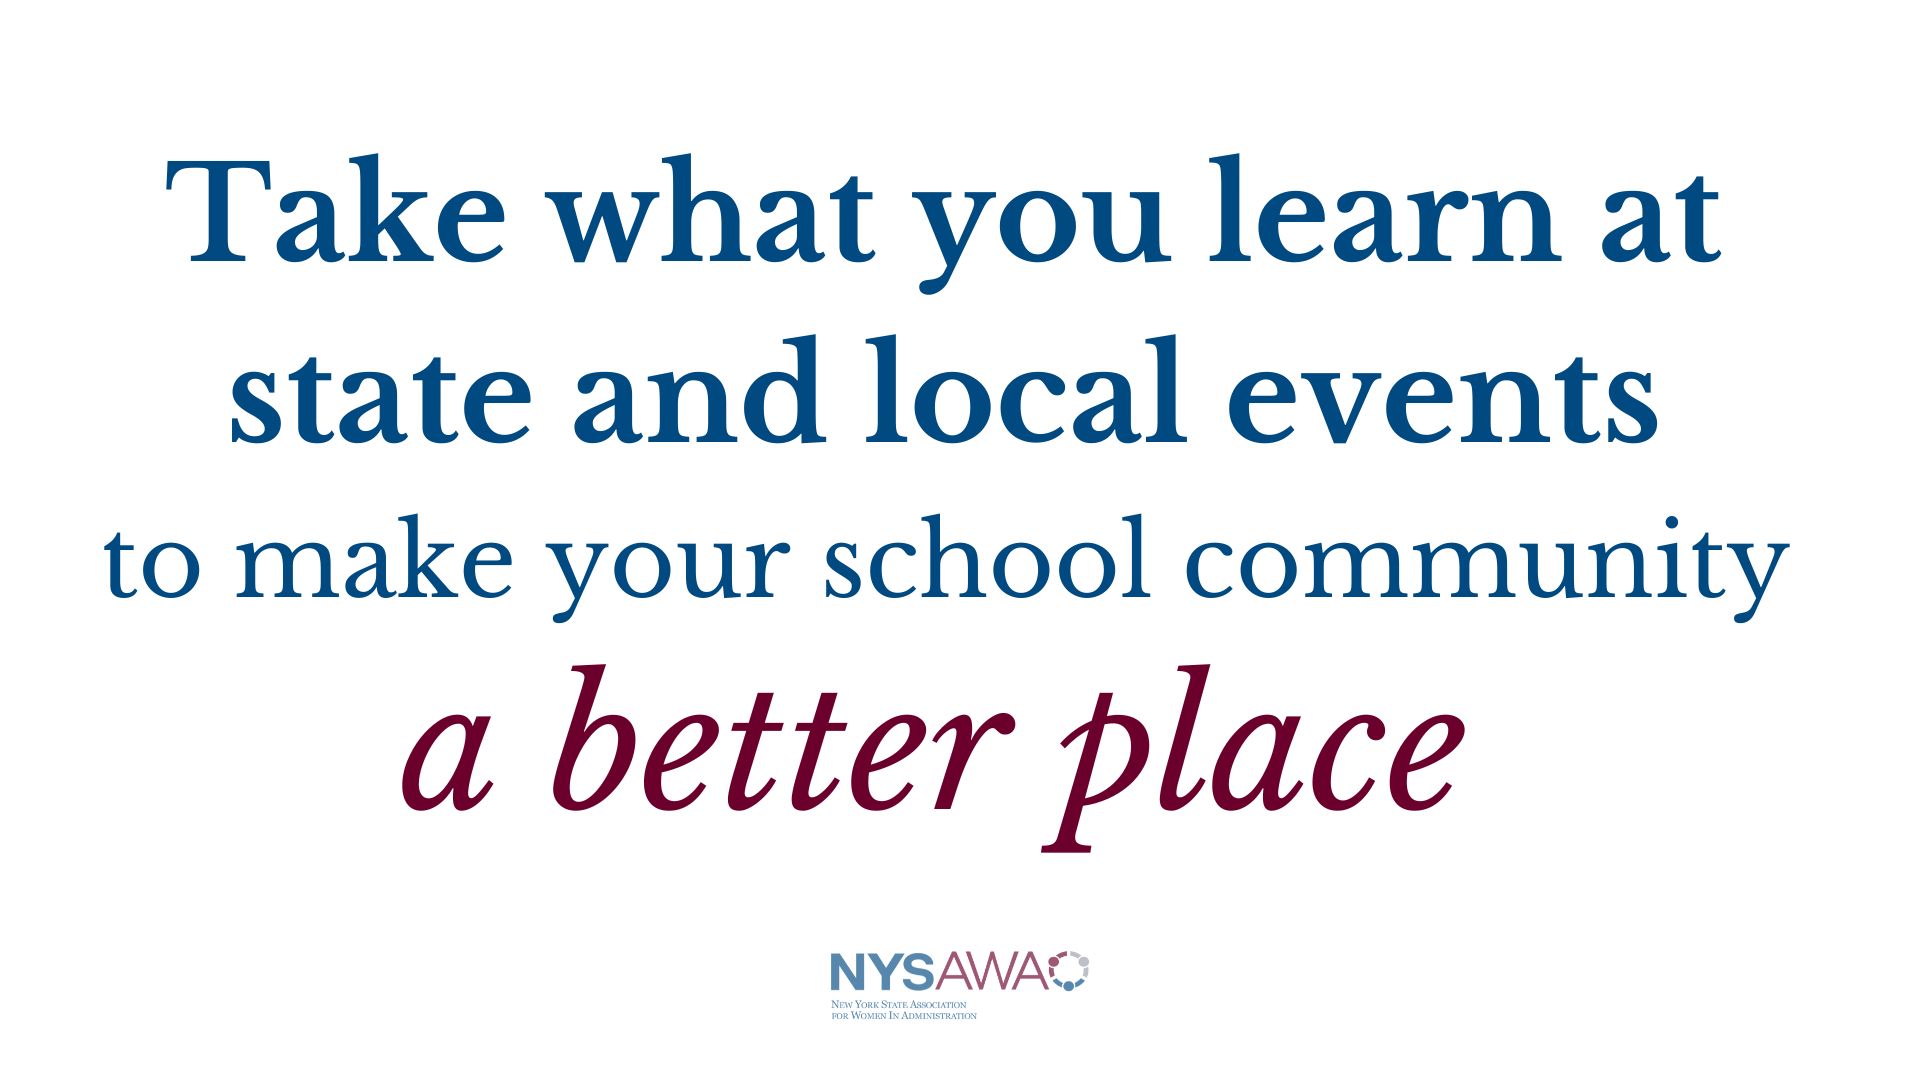 Take what you learn at state and local events to make your school community a better place.